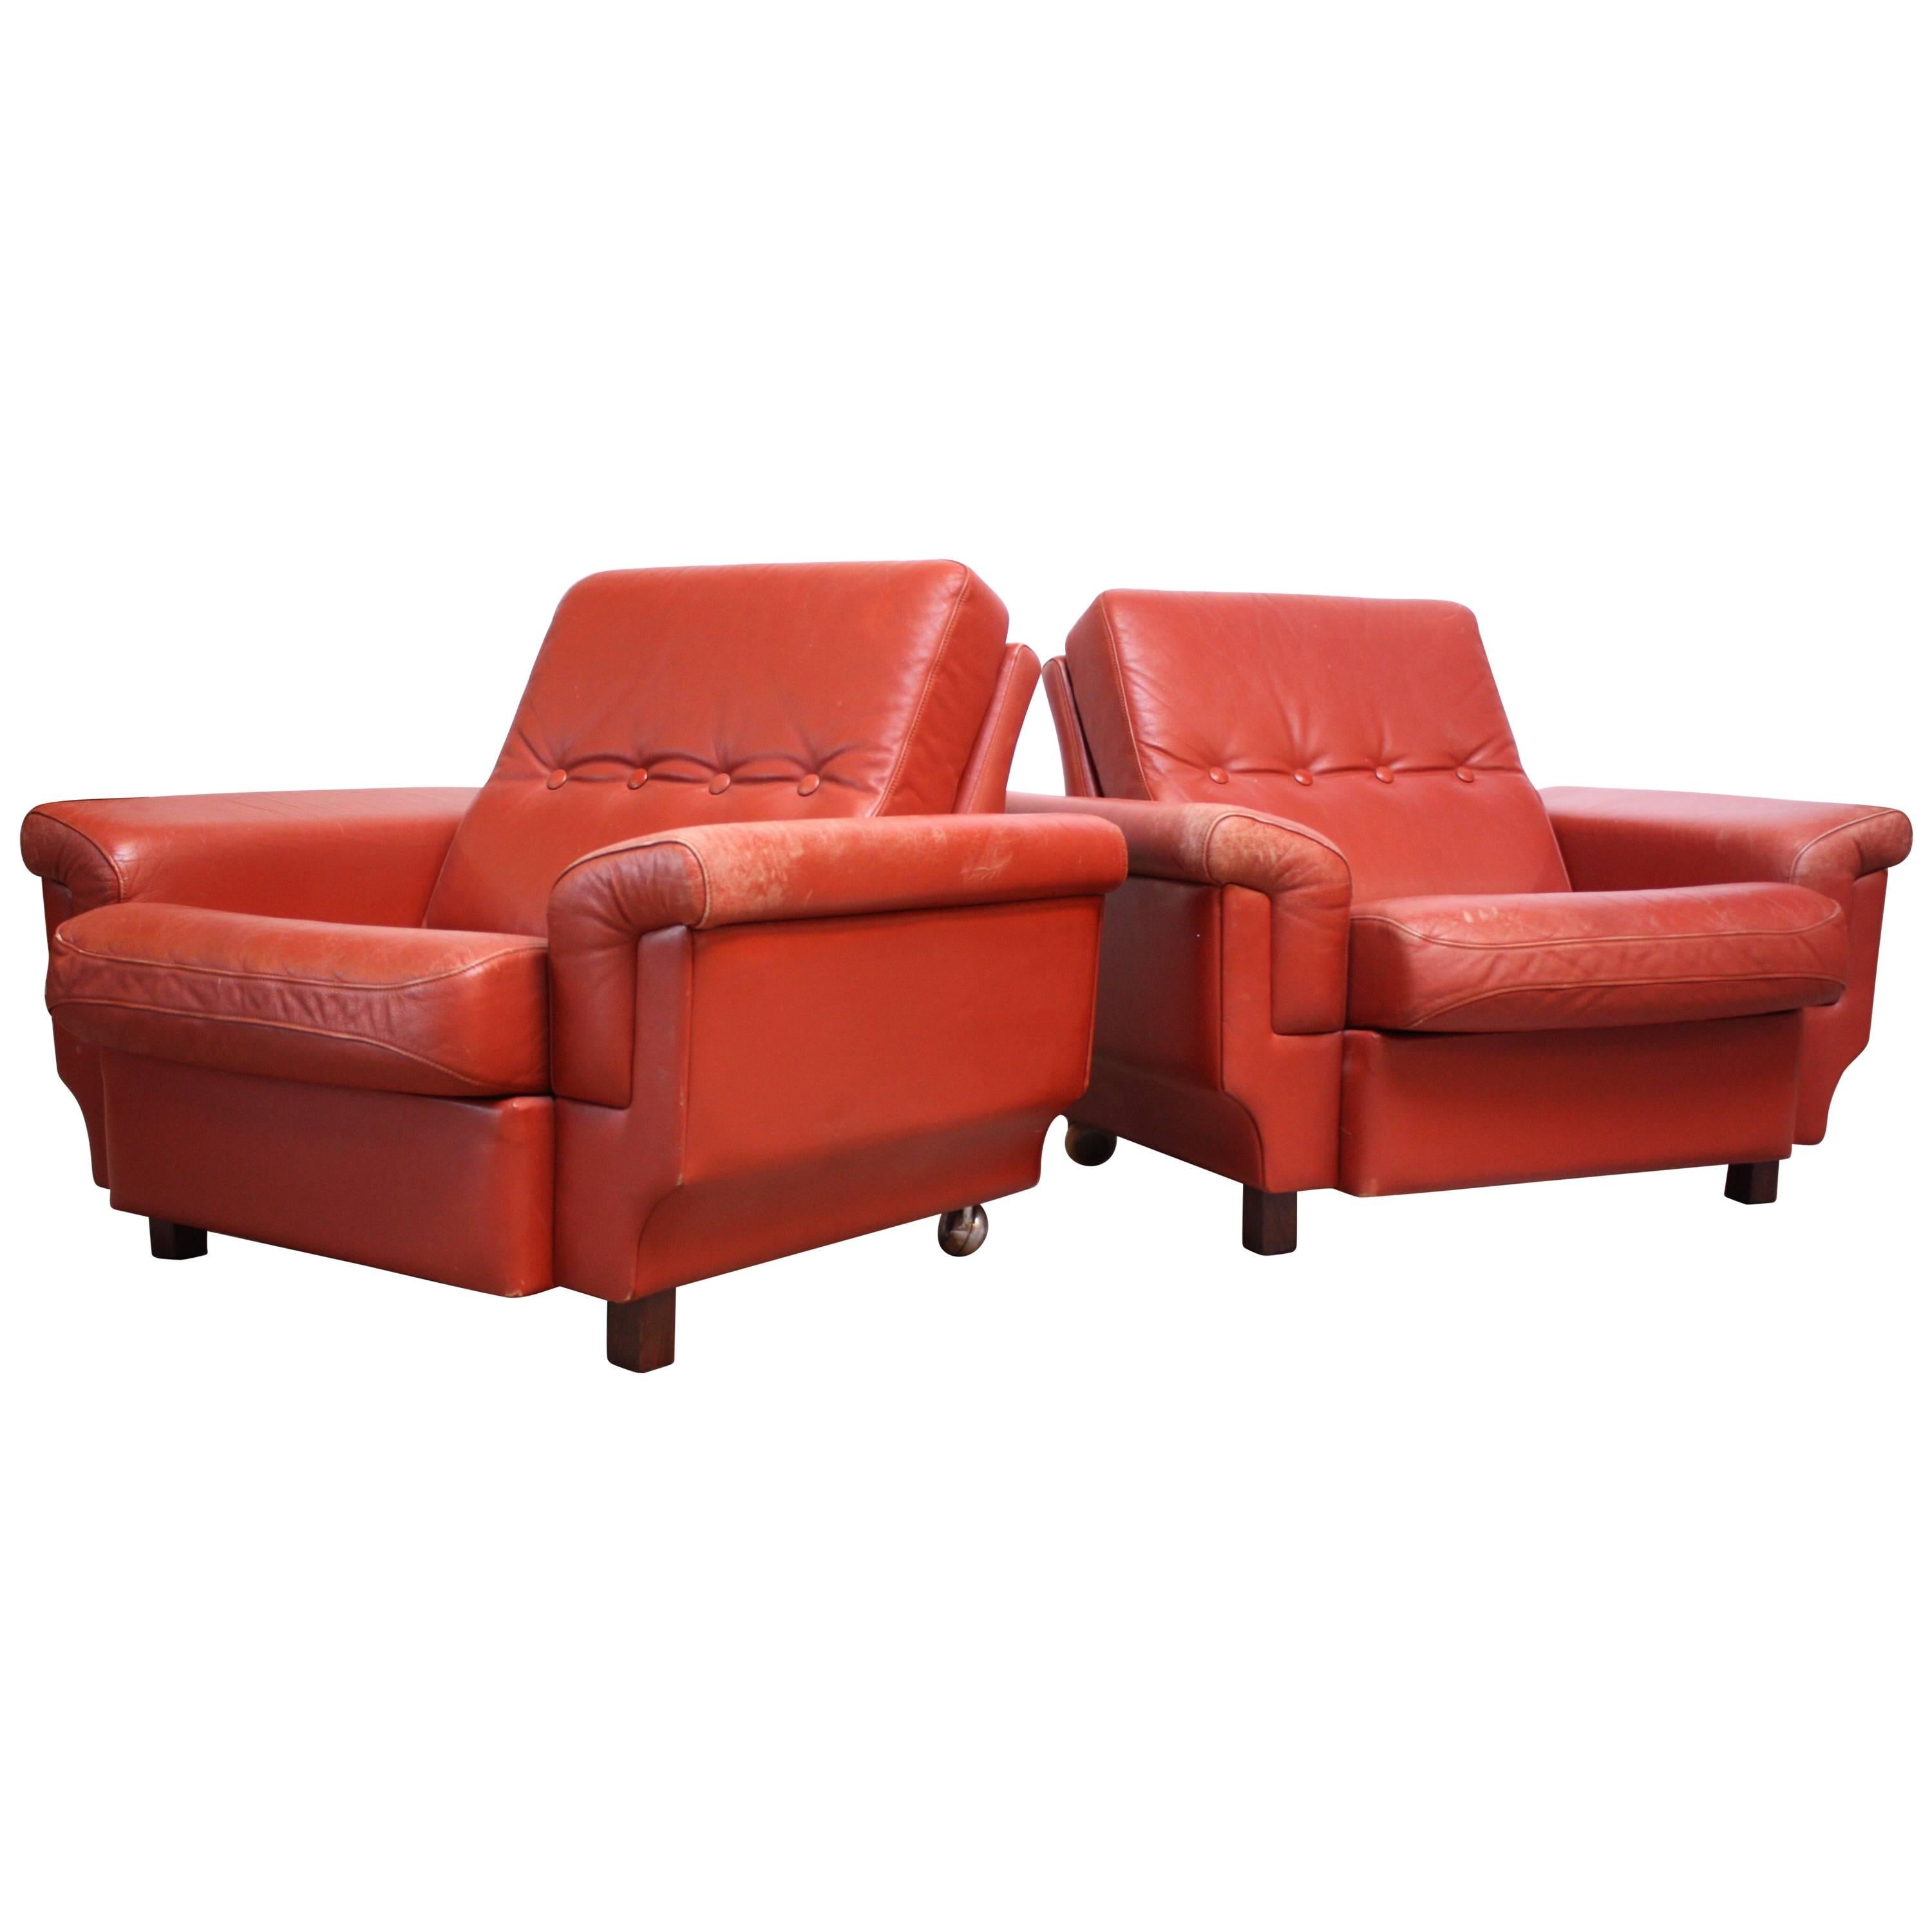 Pair of Danish Modern Lounge Chairs in Coral Leather